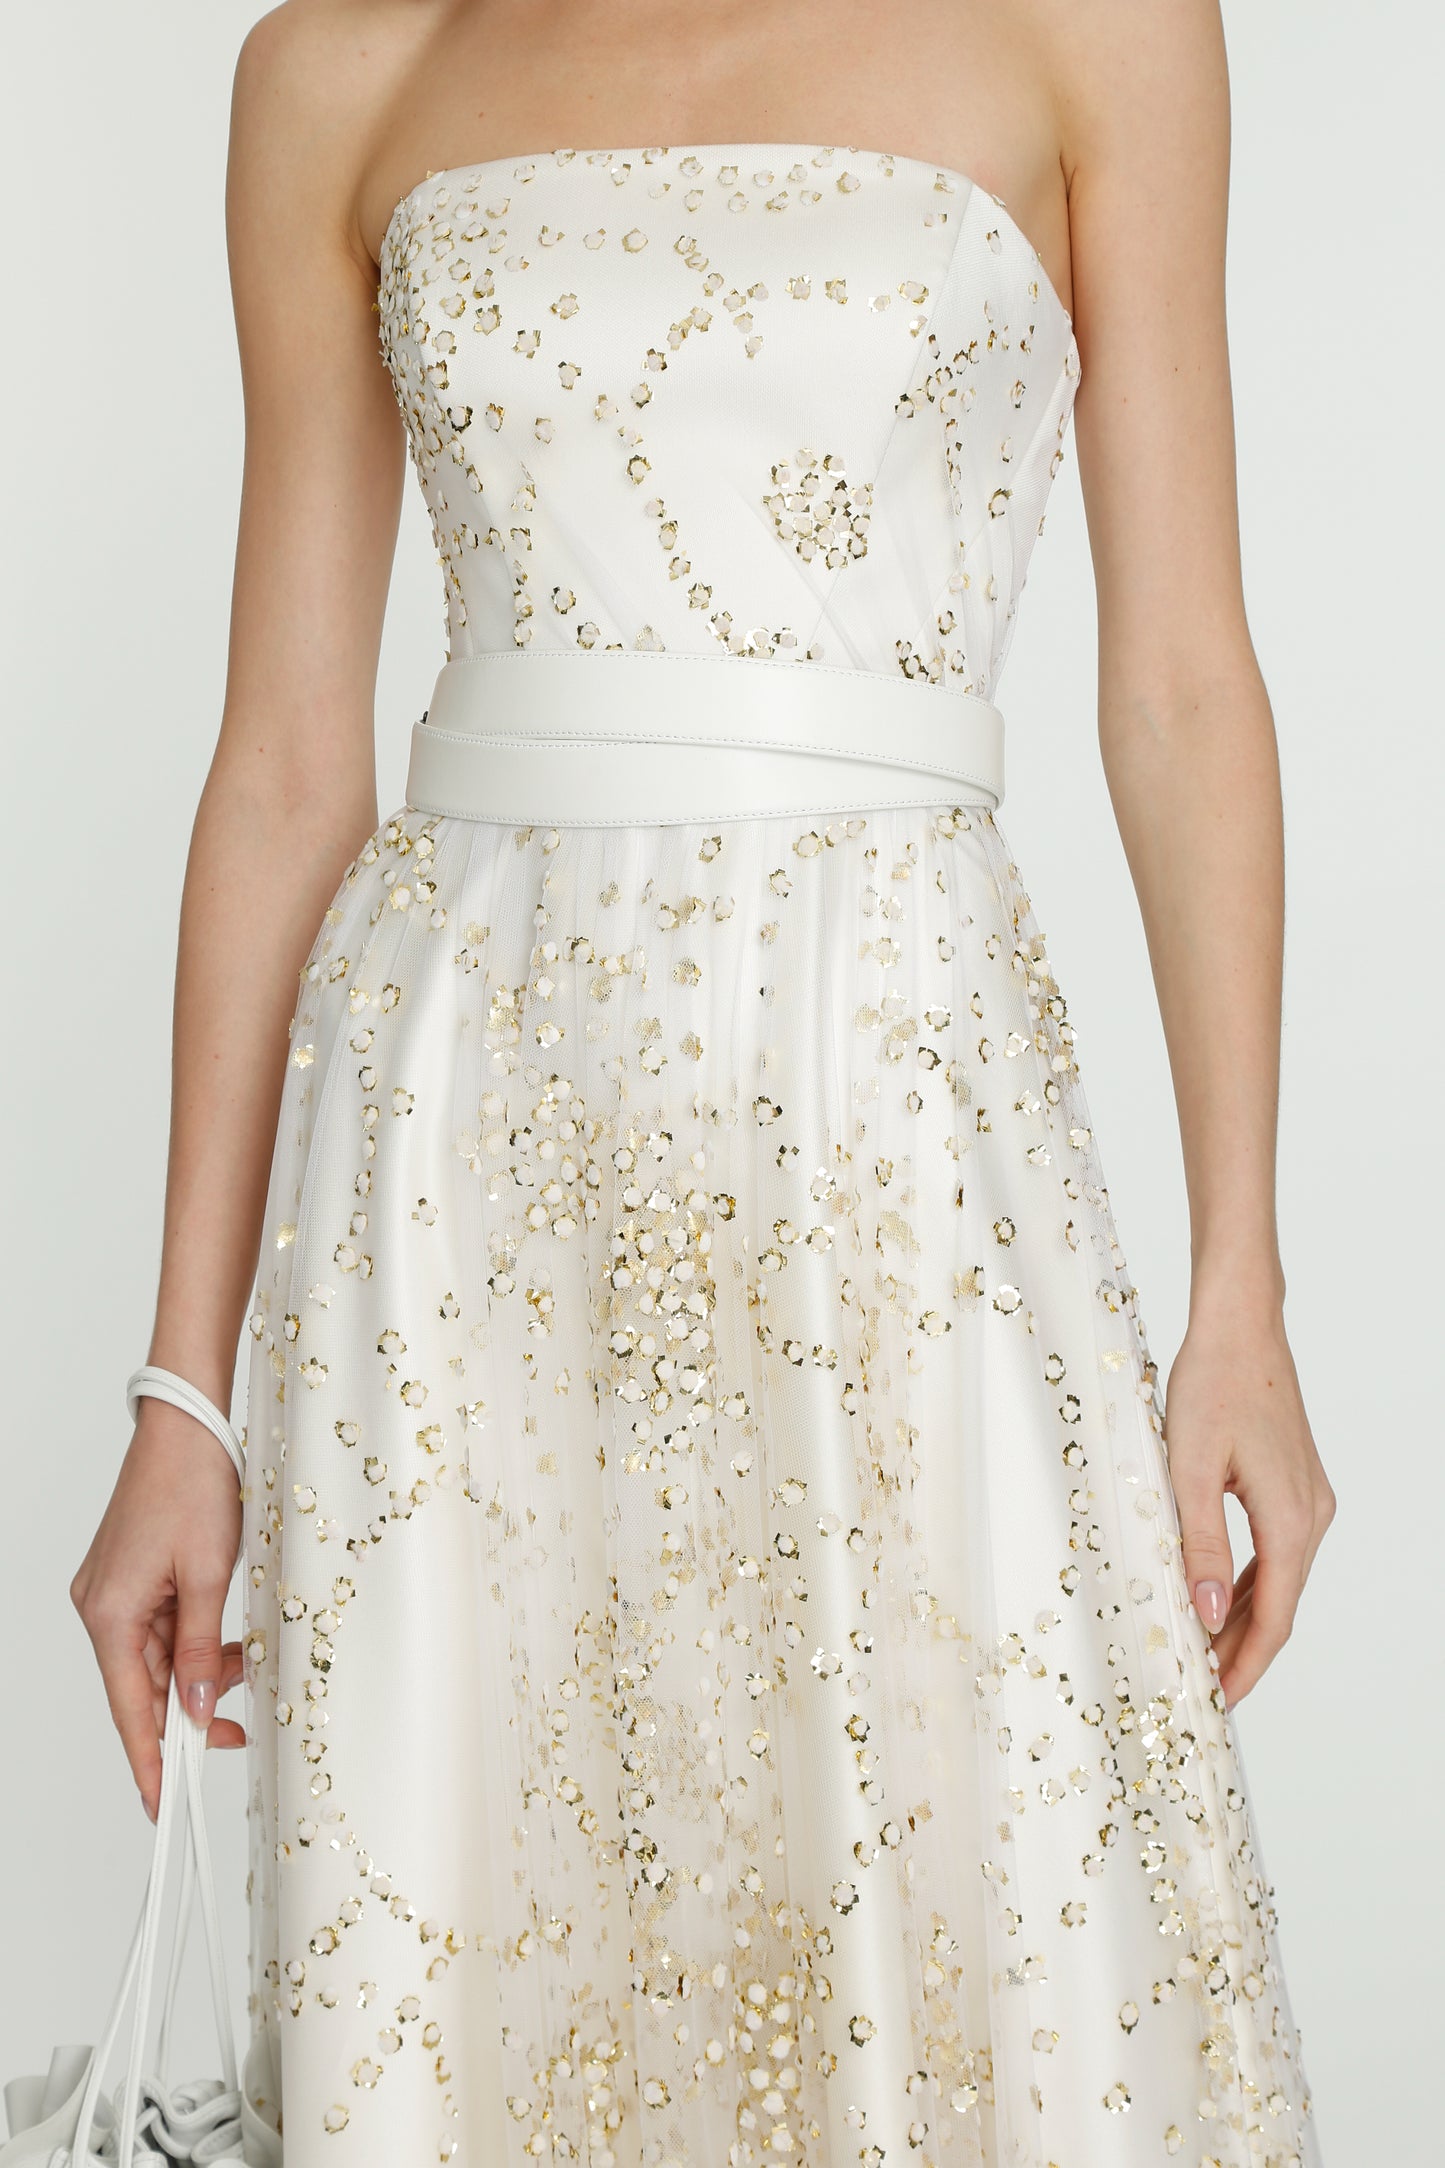 Off-White and Gold Sparkling Dress